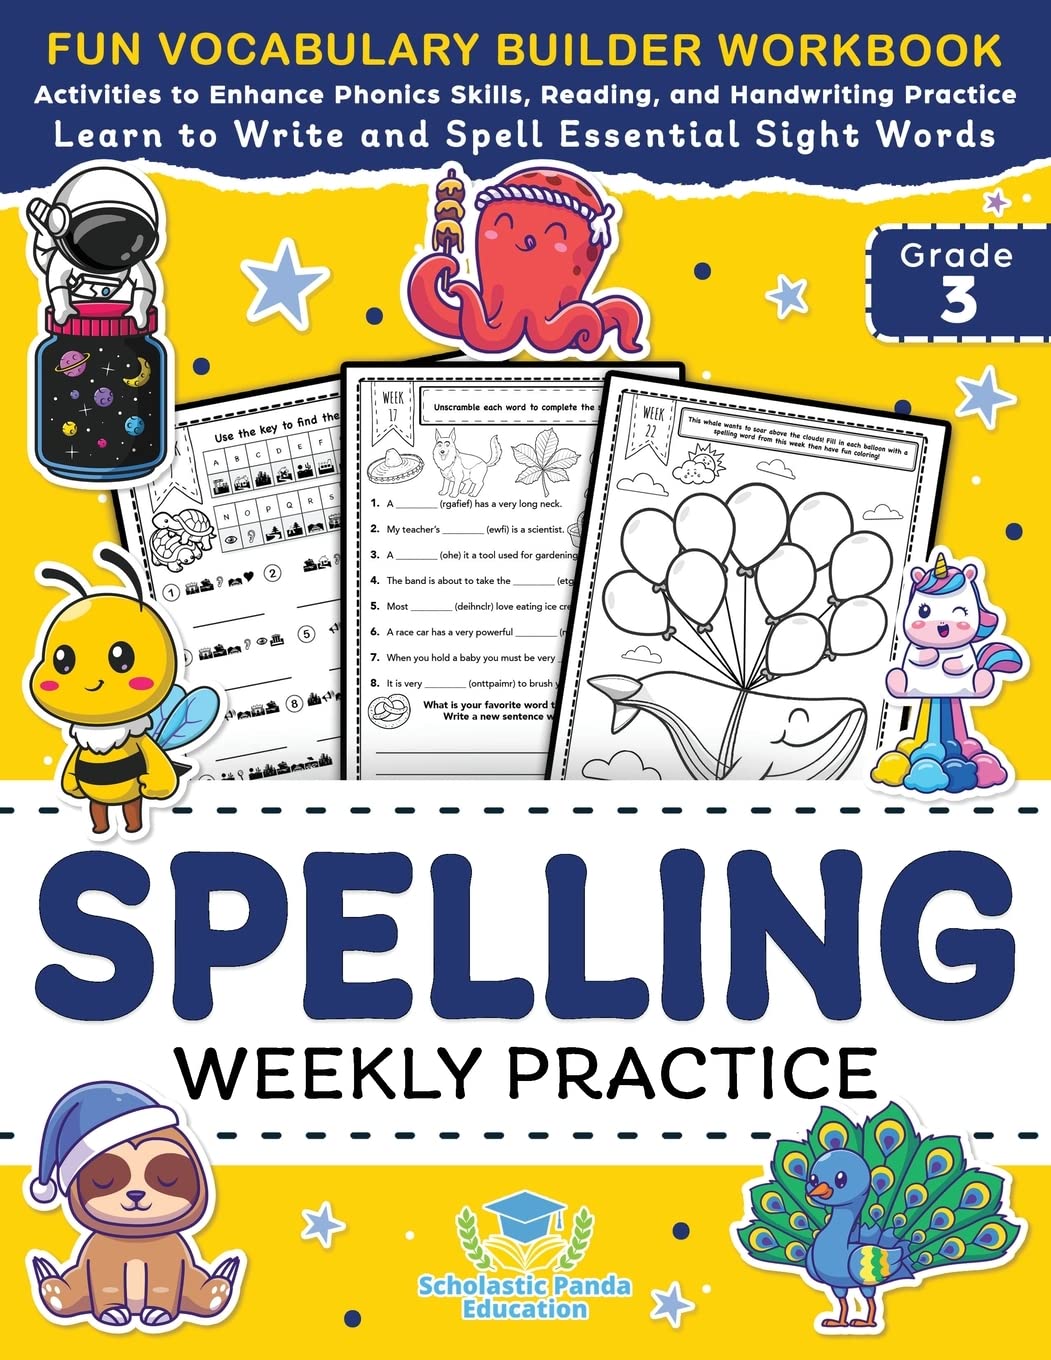 Spelling Weekly Practice for 3rd Grade: Vocabulary Builder Workbook to Learn to Write and Spell Essential Sight Words Phonics Activities and Handwriti by Panda Education, Scholastic